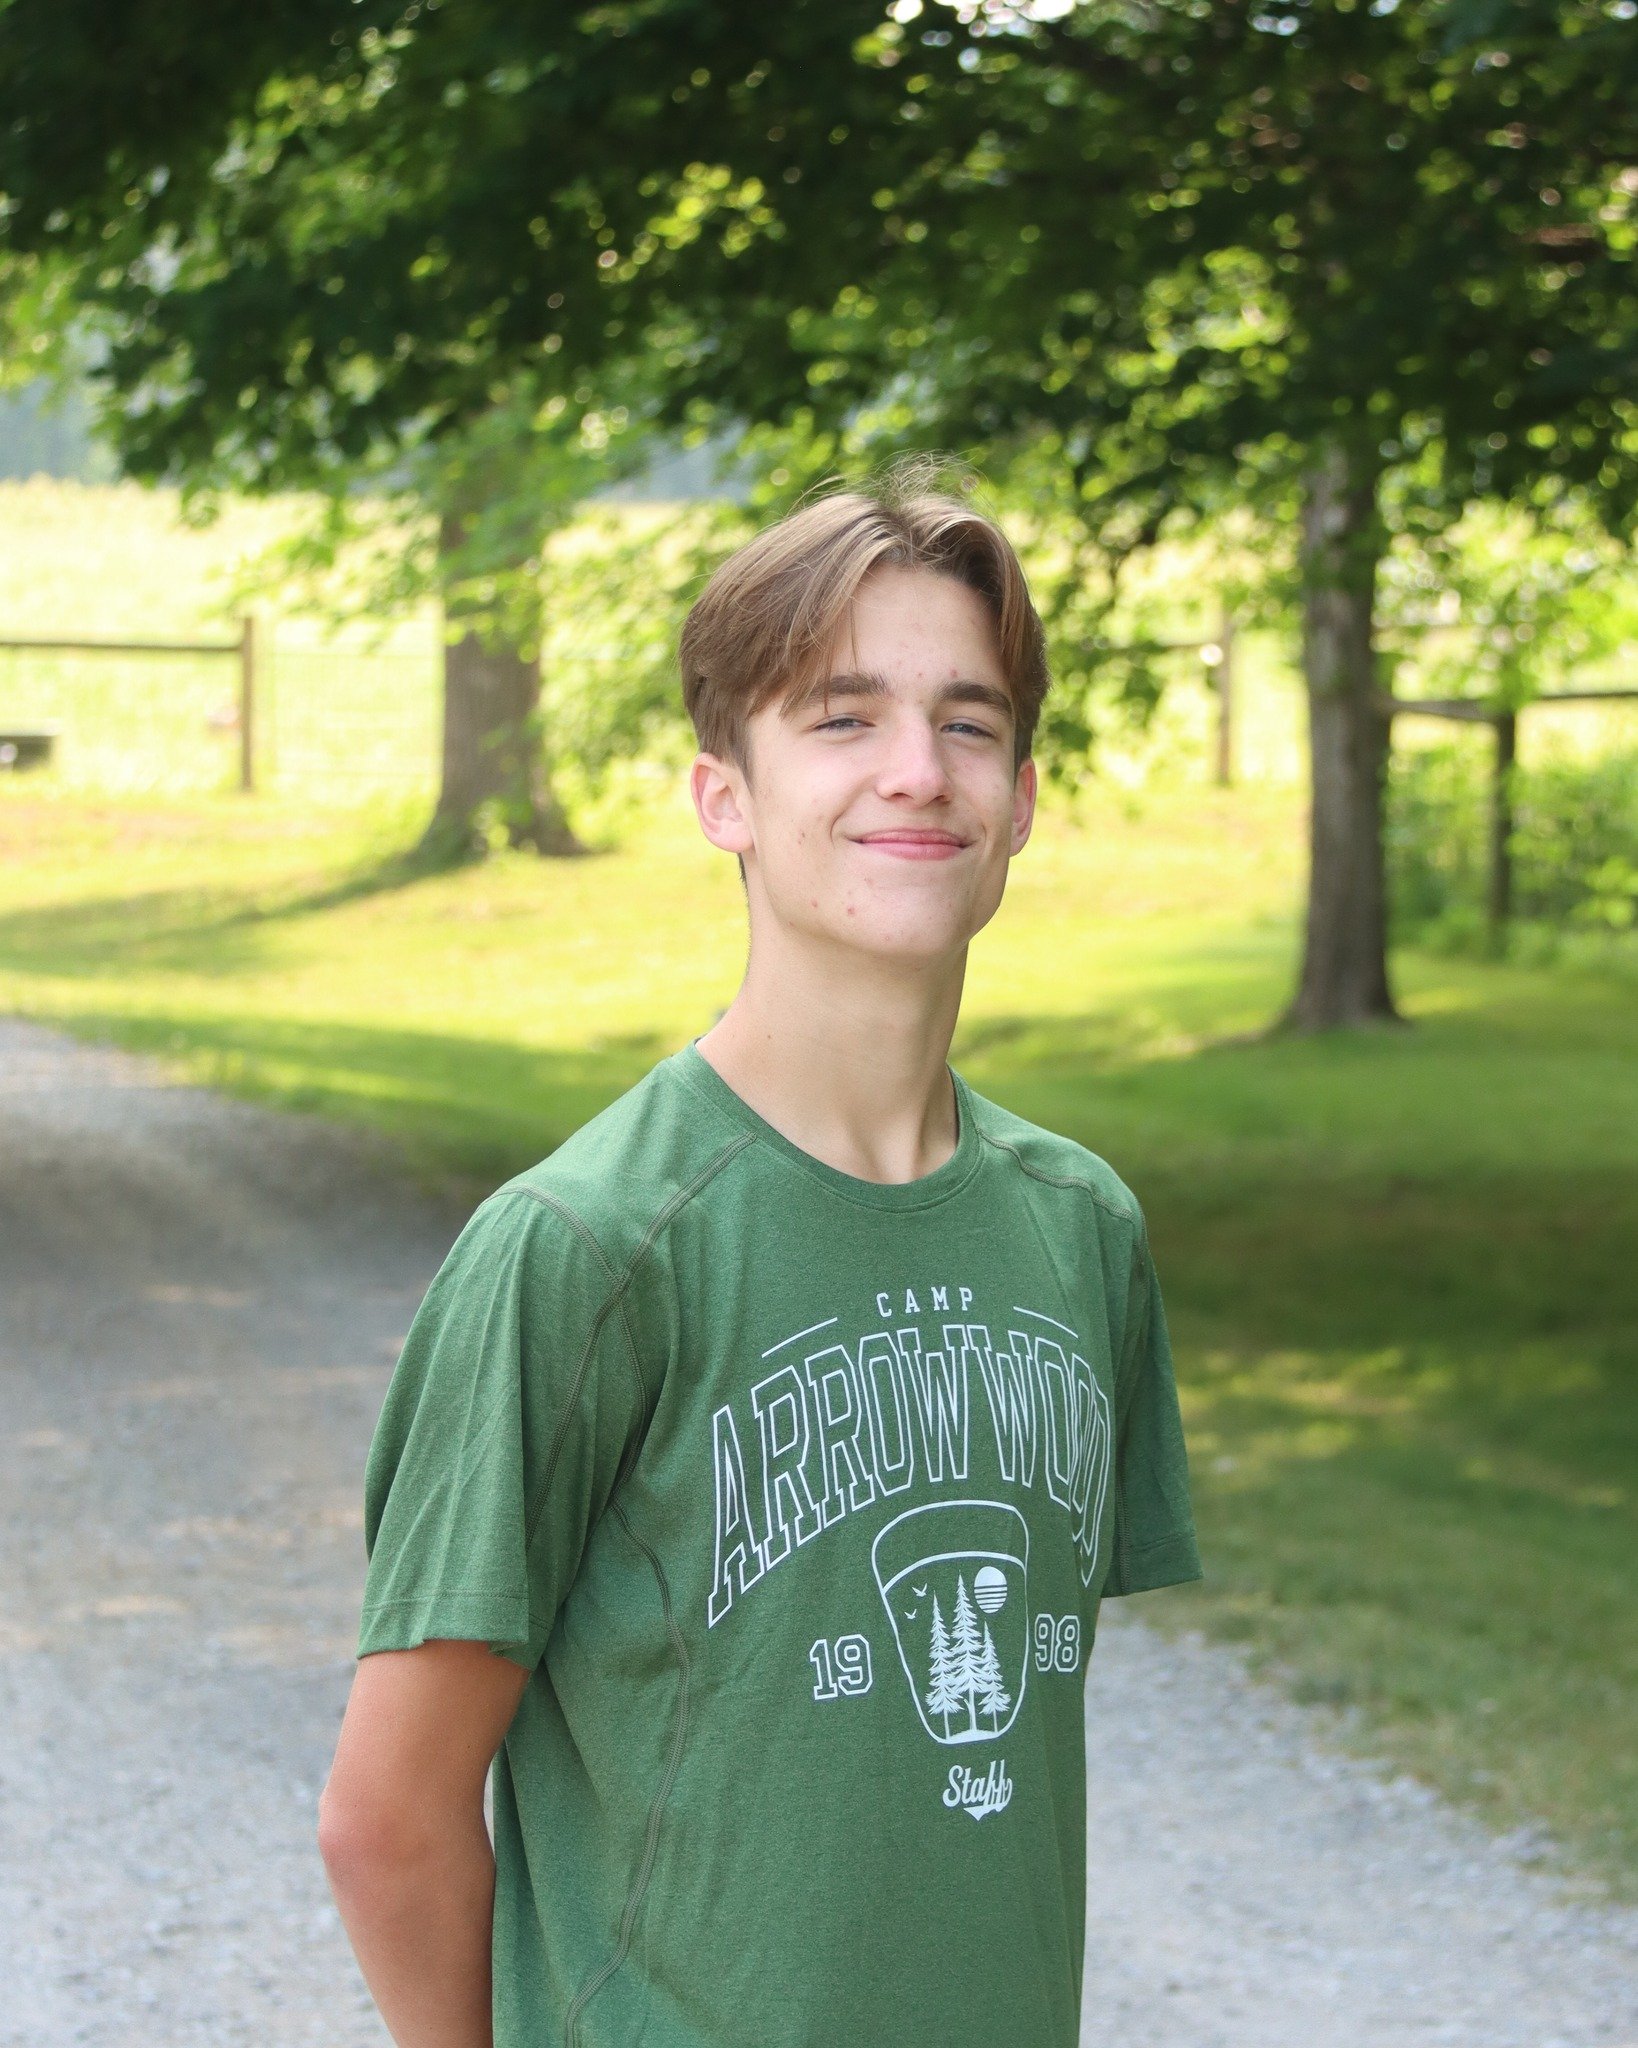 SUMMER STAFF SPOTLIGHT
Sam (Counselor, 4th Summer)
🏡 Maryville, TN
Favorite Camp Food: 🍲 beans, chicken and rice
Favorite Camp Activities: 🏹 Archery Tag
Will bring his running shoes to continue training🏃&zwj;♂️ 
Favorite Bible Verse: Matthew 16:2